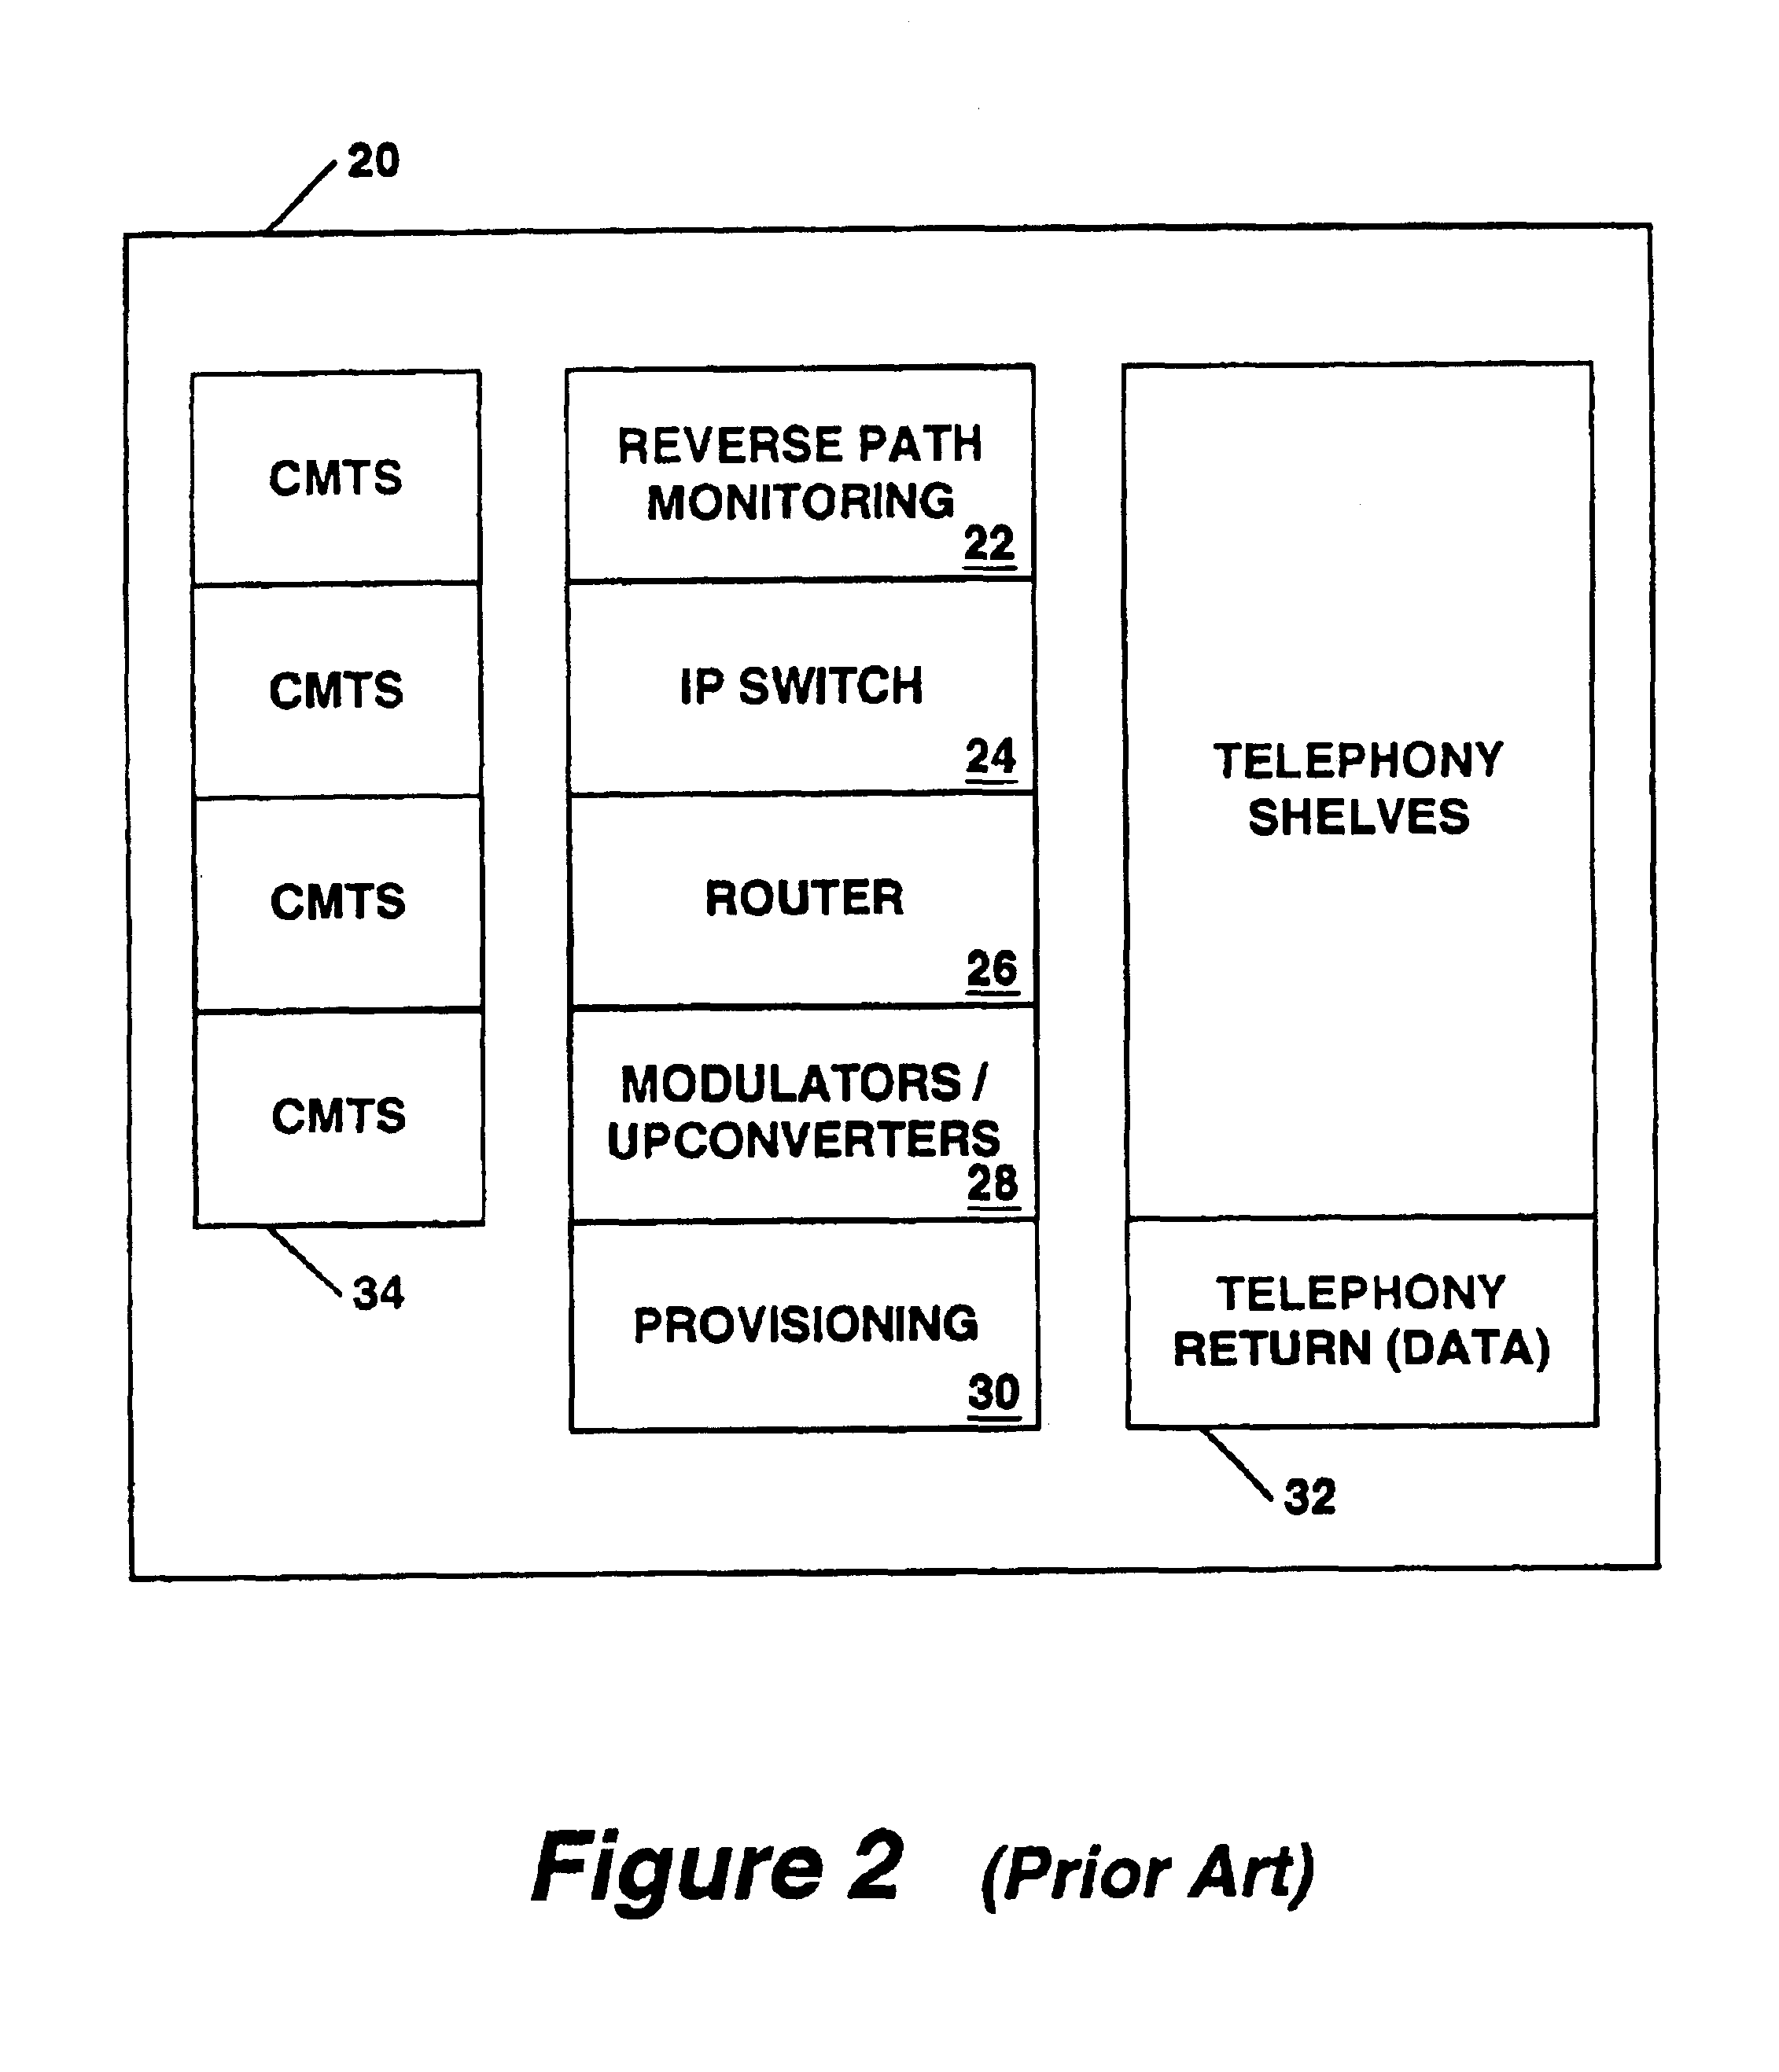 System and process for embedded cable modem in a cable modem termination system to enable diagnostics and monitoring